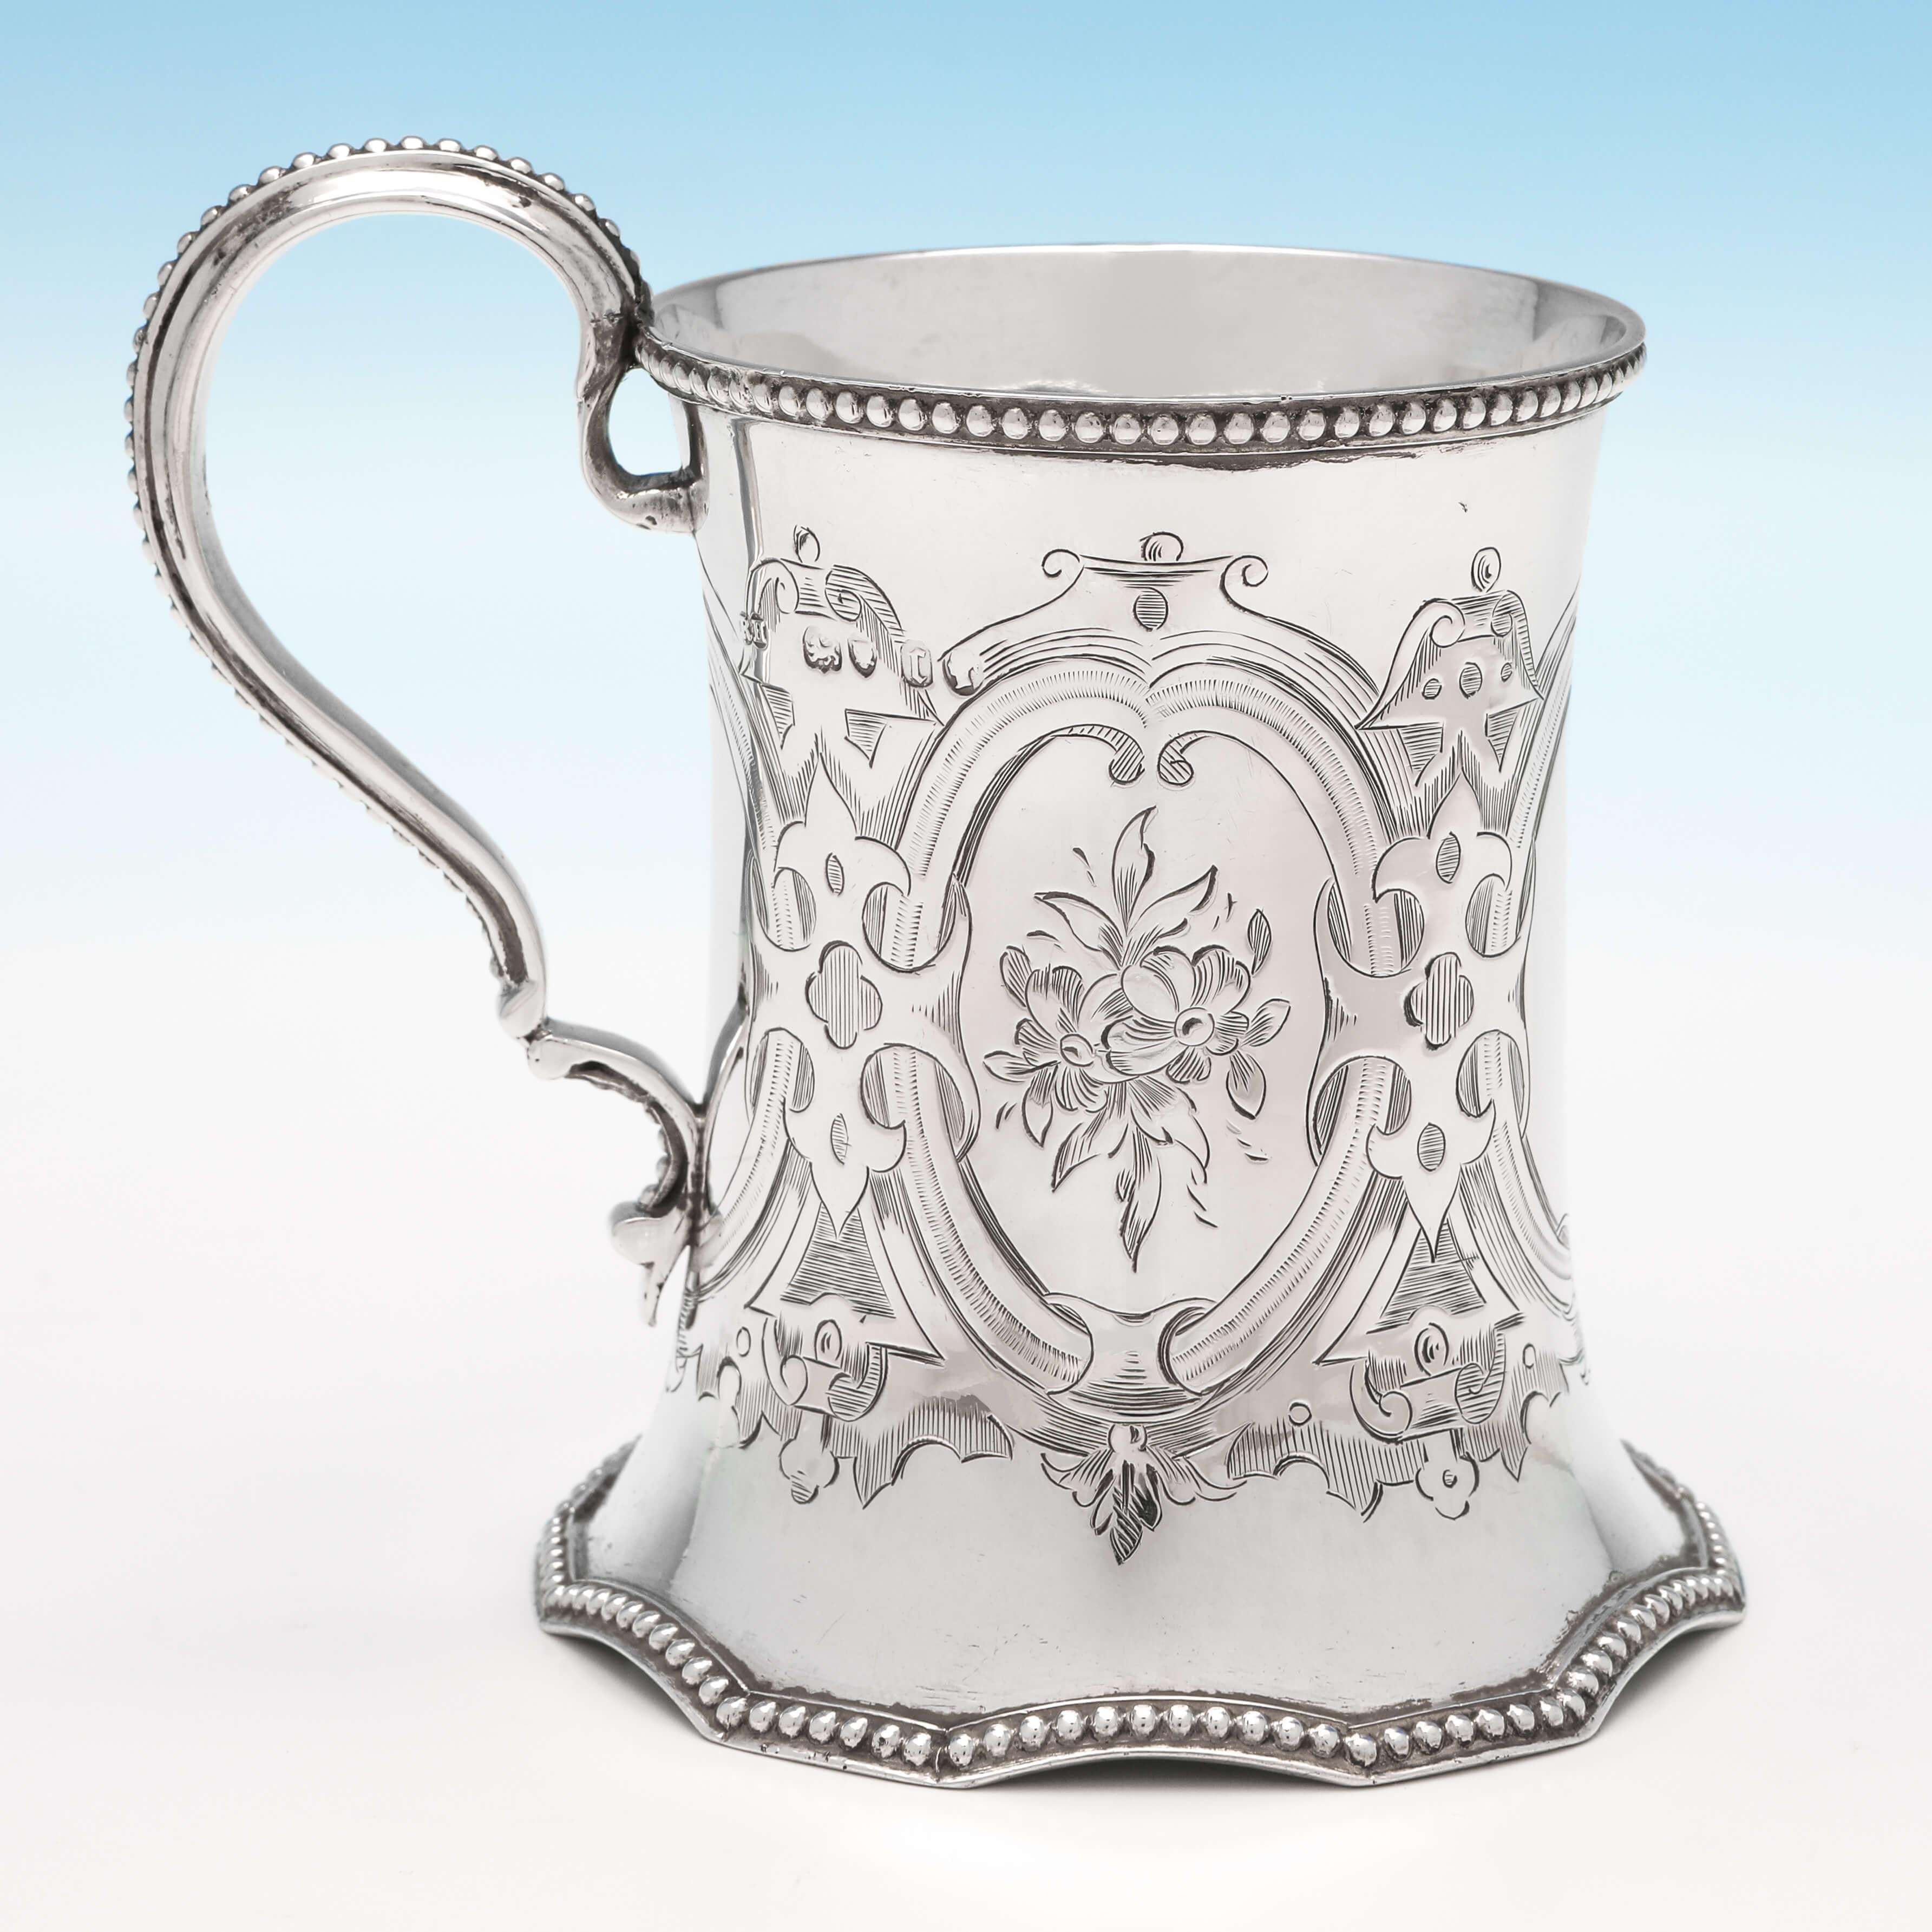 English 19th Century Victorian Sterling Silver Christening Mug by Robert Hennell II 1858